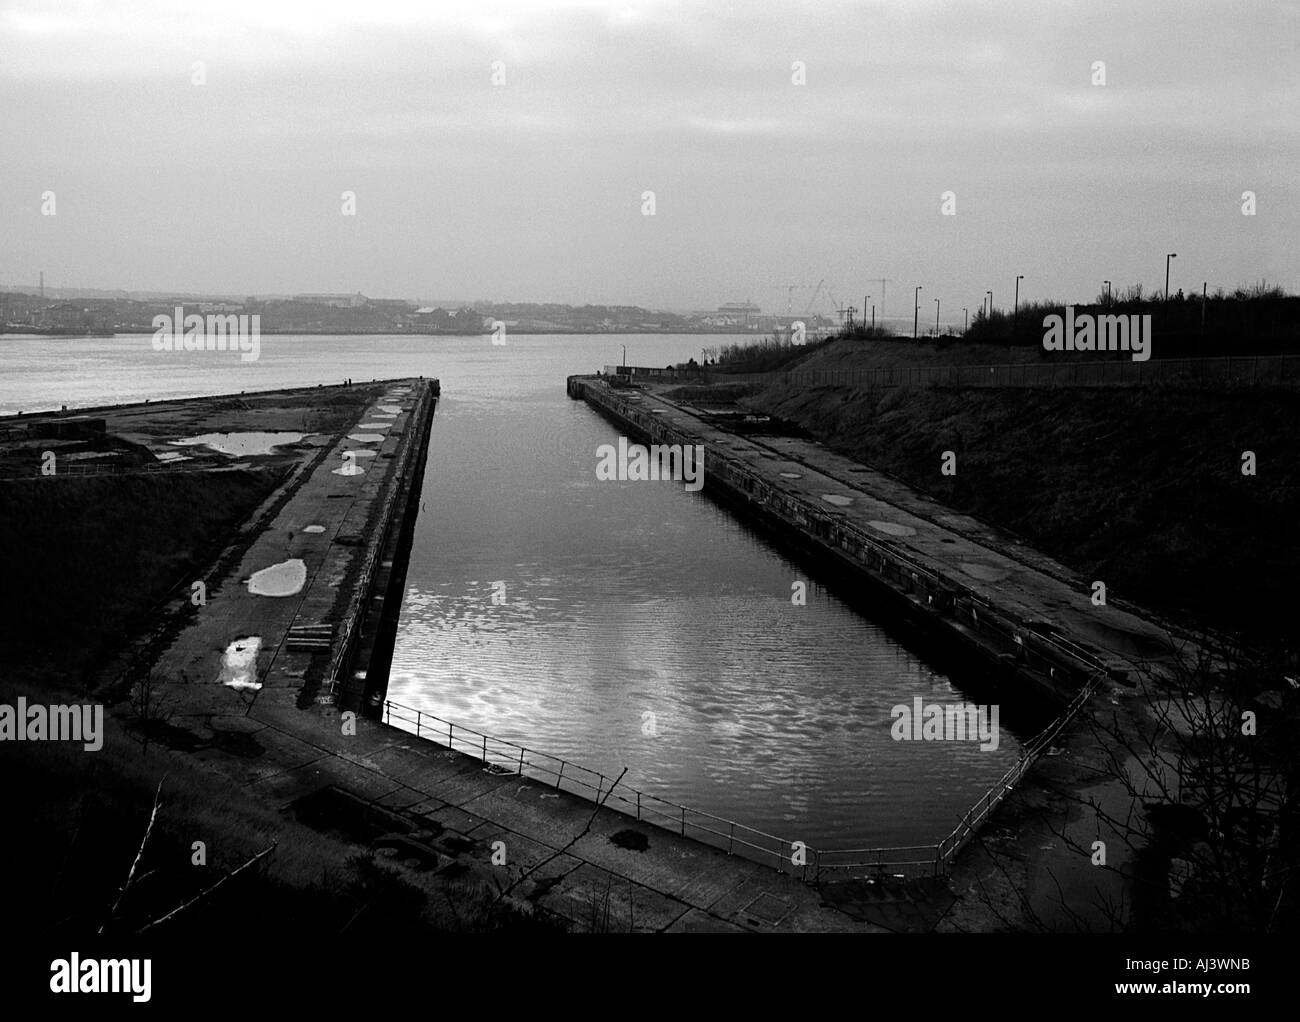 Industrial heritage of the River Tyne. A derelict shipyard in North Shields, Tyne and Wear, 2006. Stock Photo